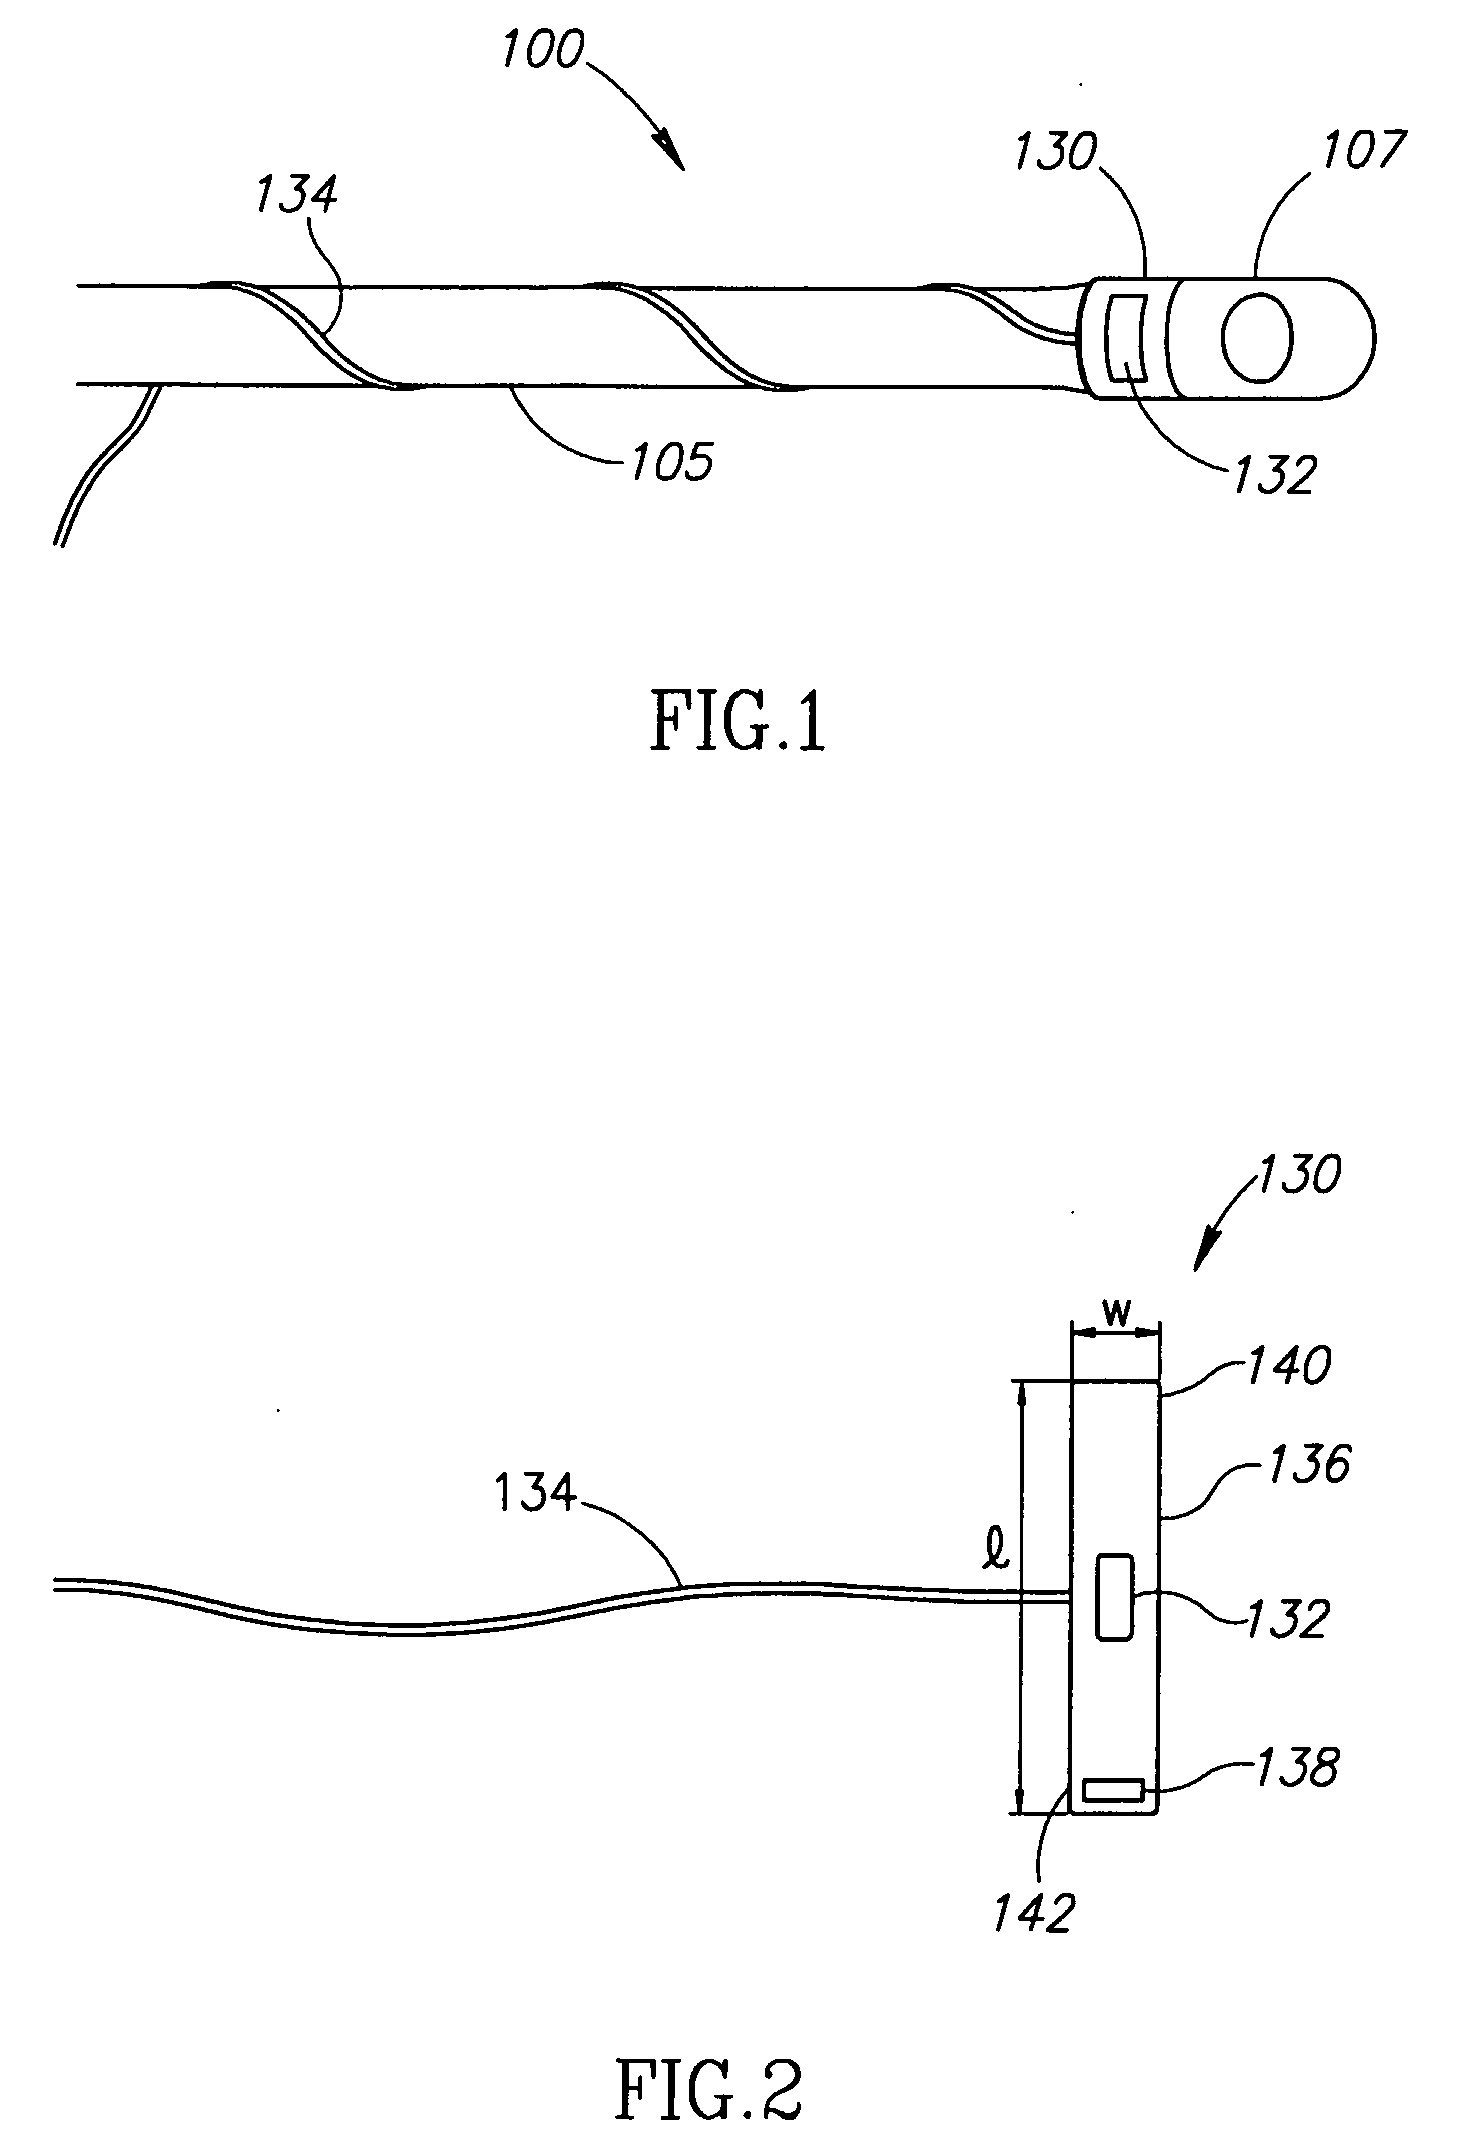 Add-On For Invasive Probe